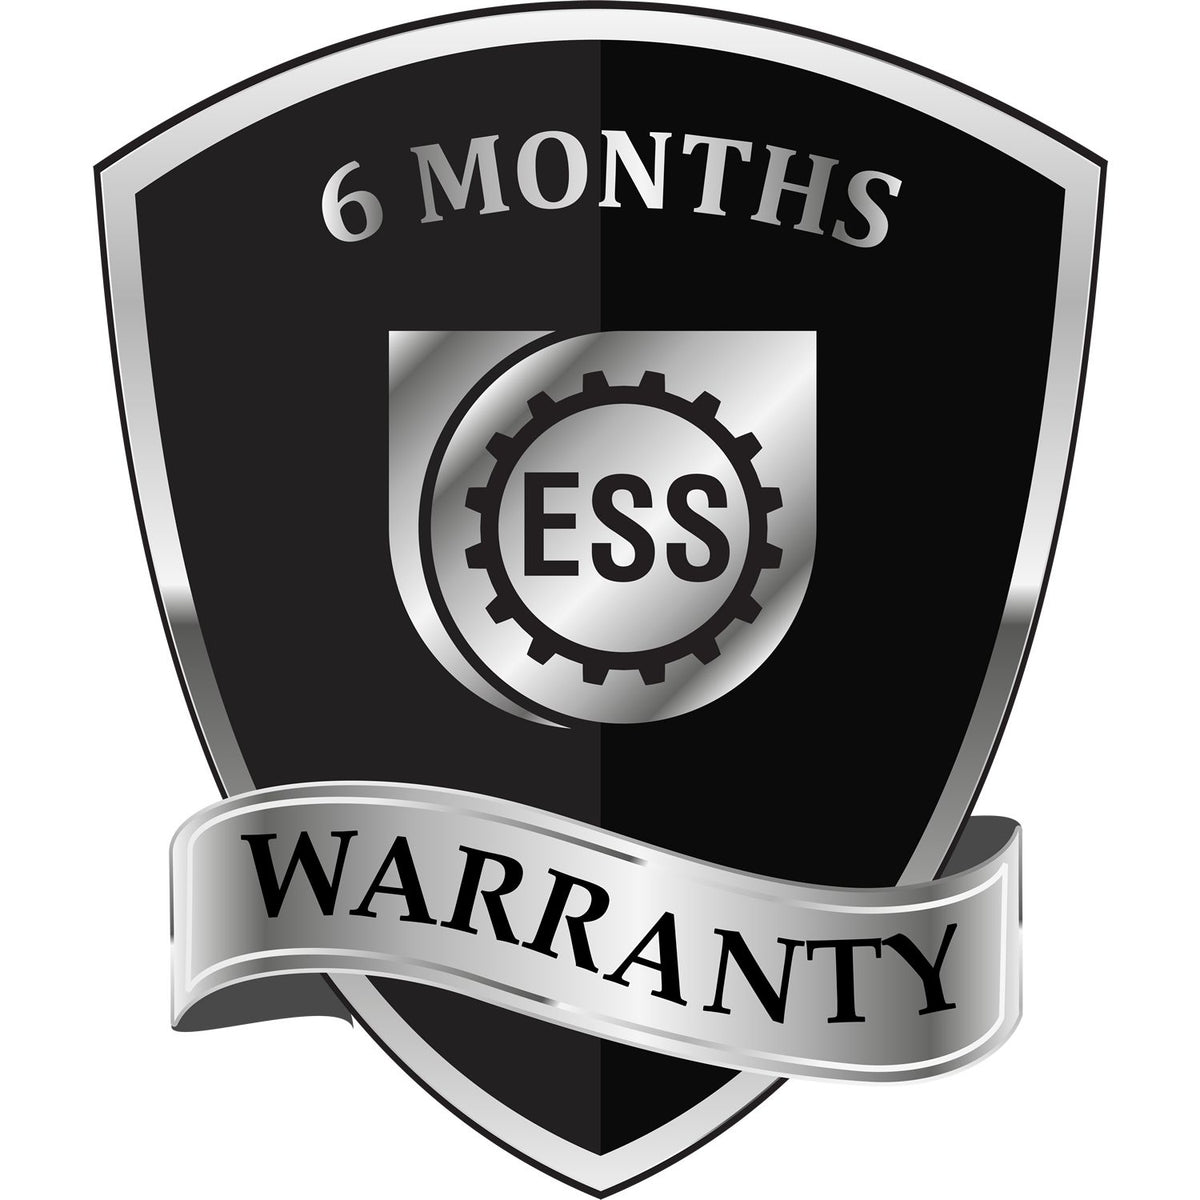 Large Narrow This account is now overdue Rubber Stamp 5667R 6 Month Warranty